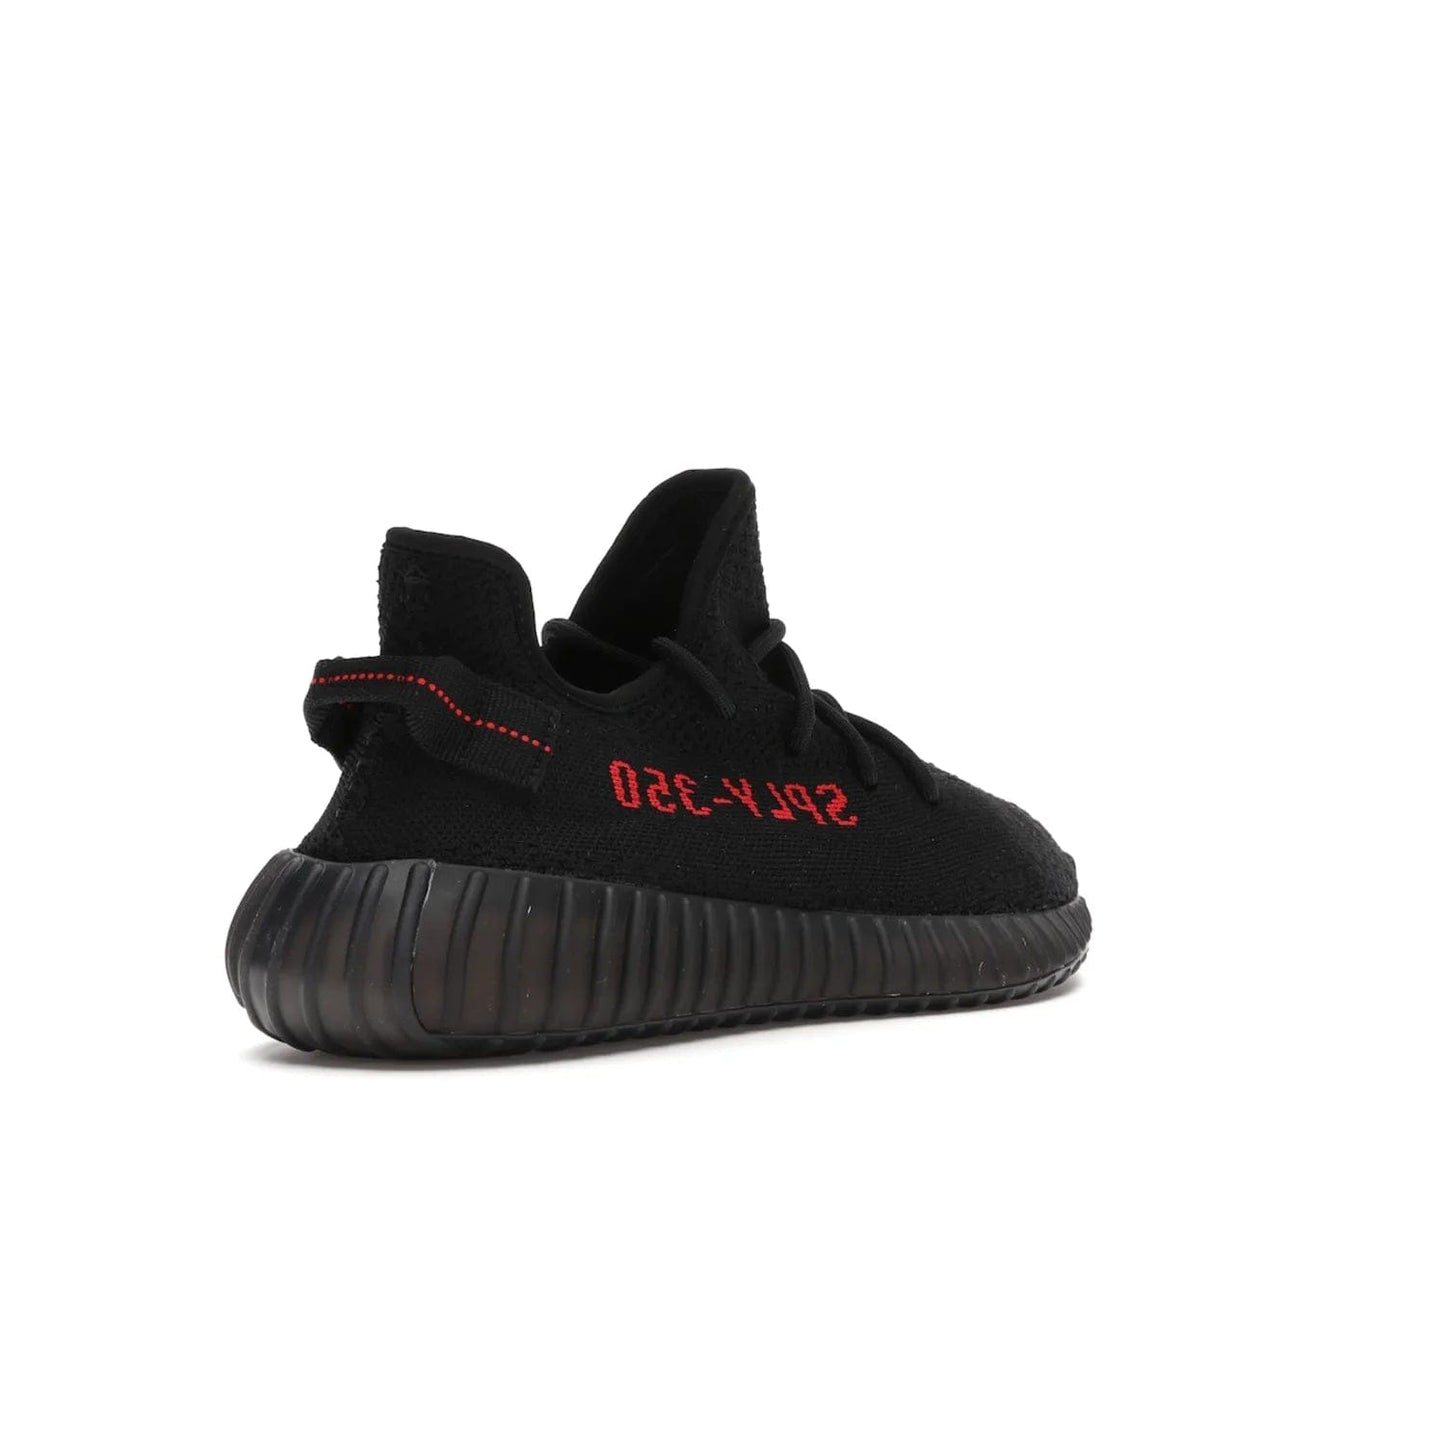 adidas Yeezy Boost 350 V2 Black Red (2017/2020) - Image 32 - Only at www.BallersClubKickz.com - Adidas Yeezy Boost 350 V2 Black Red: a classic colorway featuring black Primeknit upper, BOOST cushioning system, and iconic "SPLY-350" text. Released in 2017 for a retail price of $220.